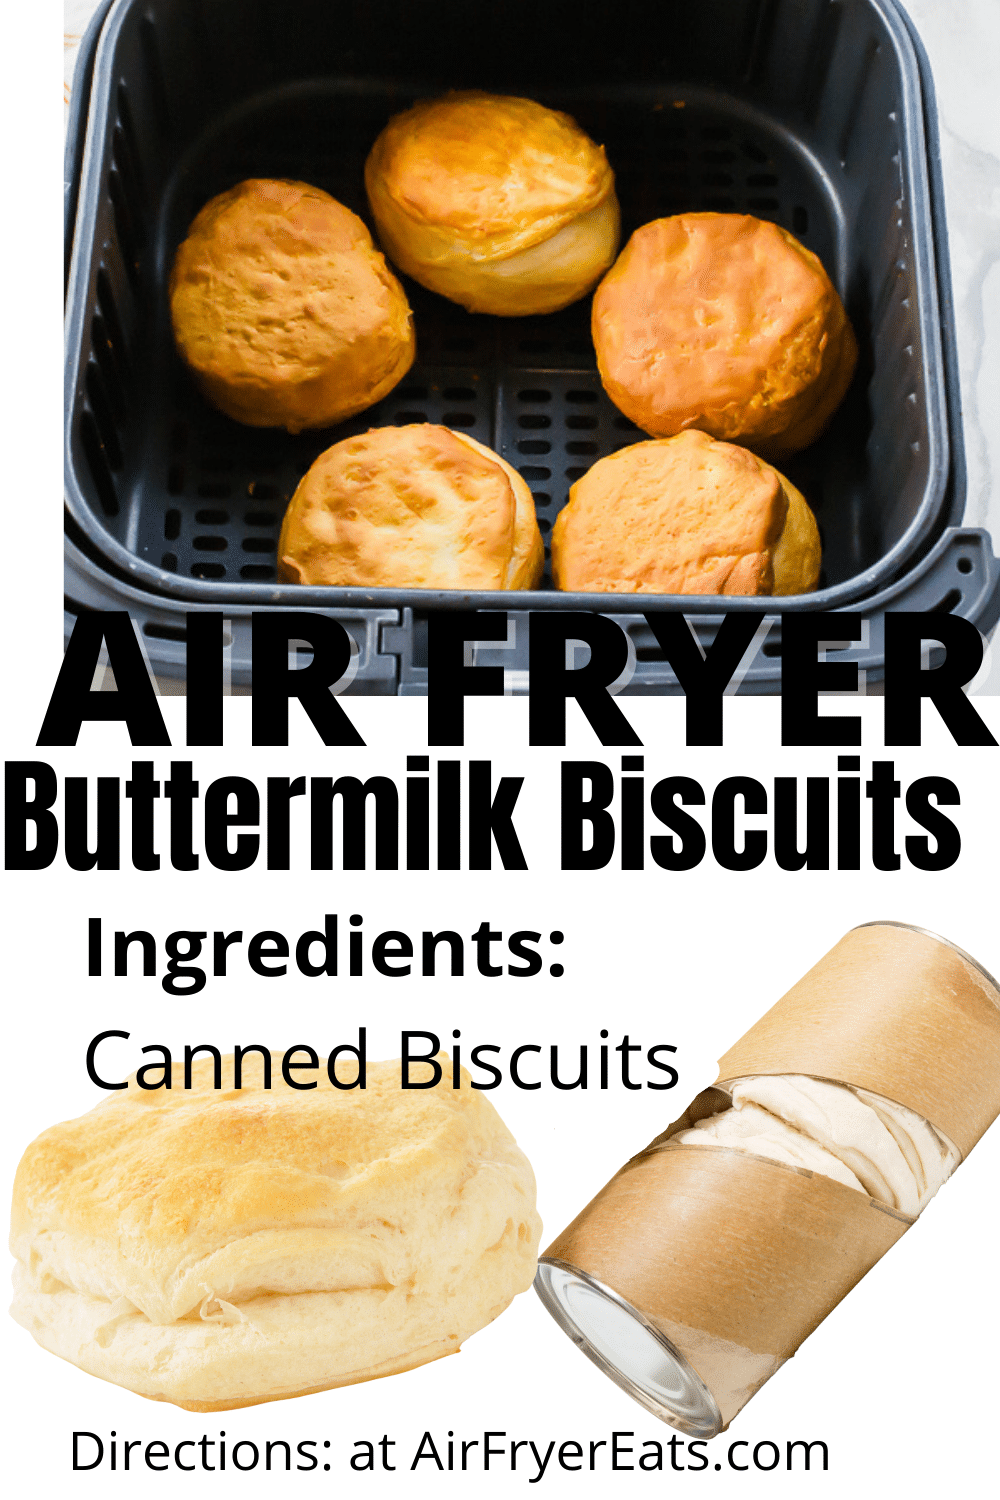 If you love buttermilk biscuits, you are going to love Air Fryer Biscuits. These canned and refrigerated biscuits come out golden brown and delicious. #airfryerbaking #airfryerbiscuits via @vegetarianmamma